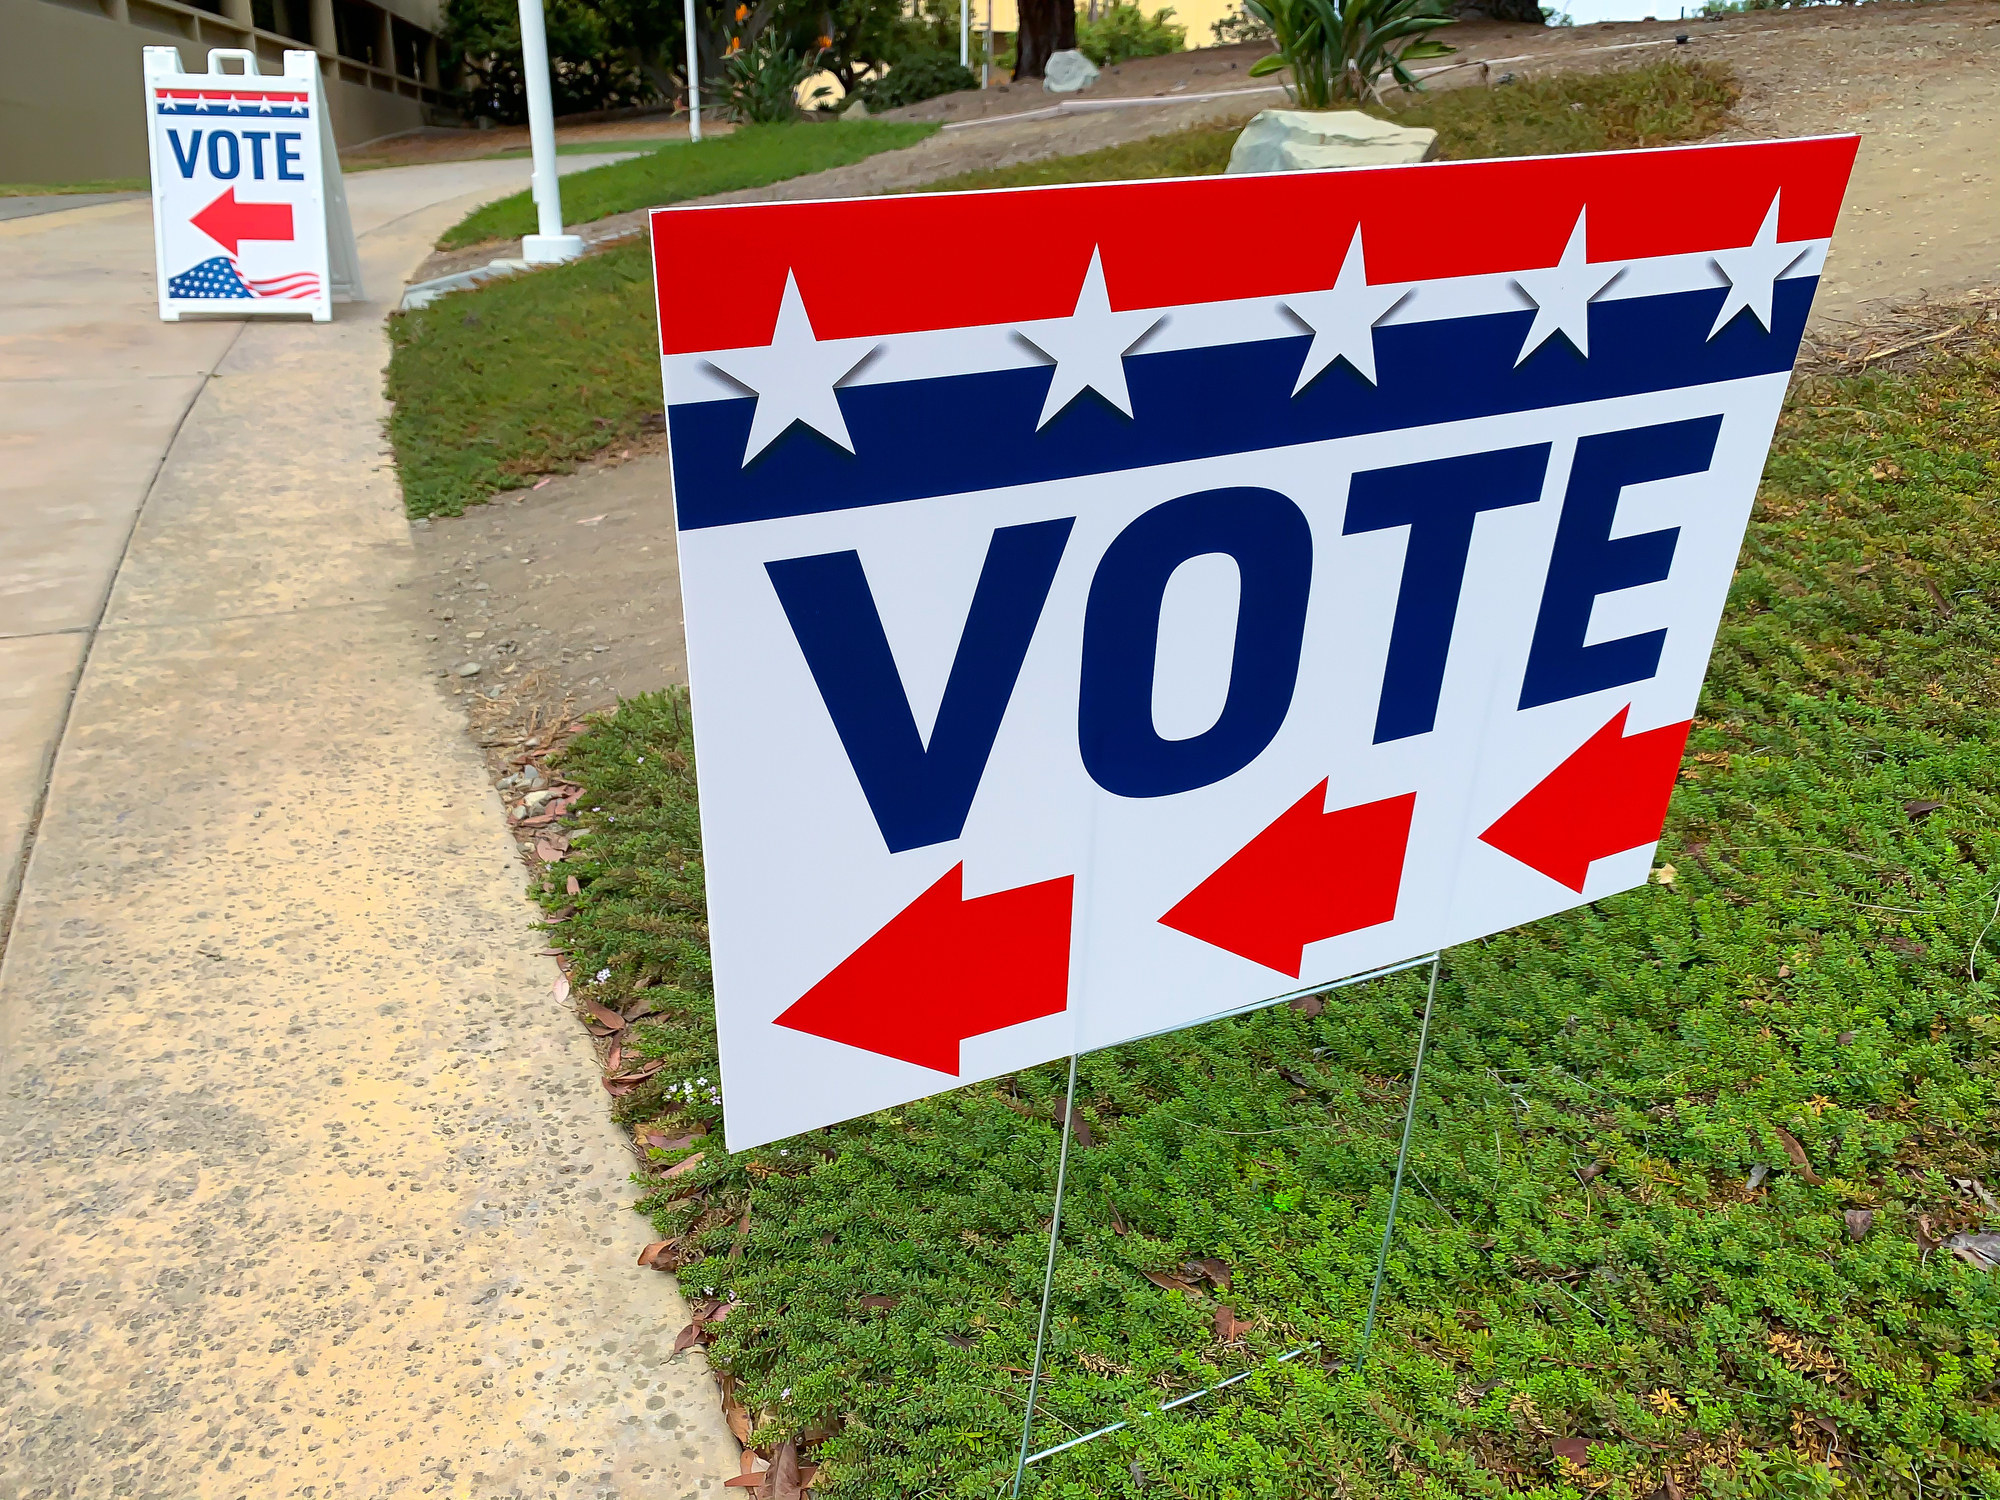 Voter signs on a lawn